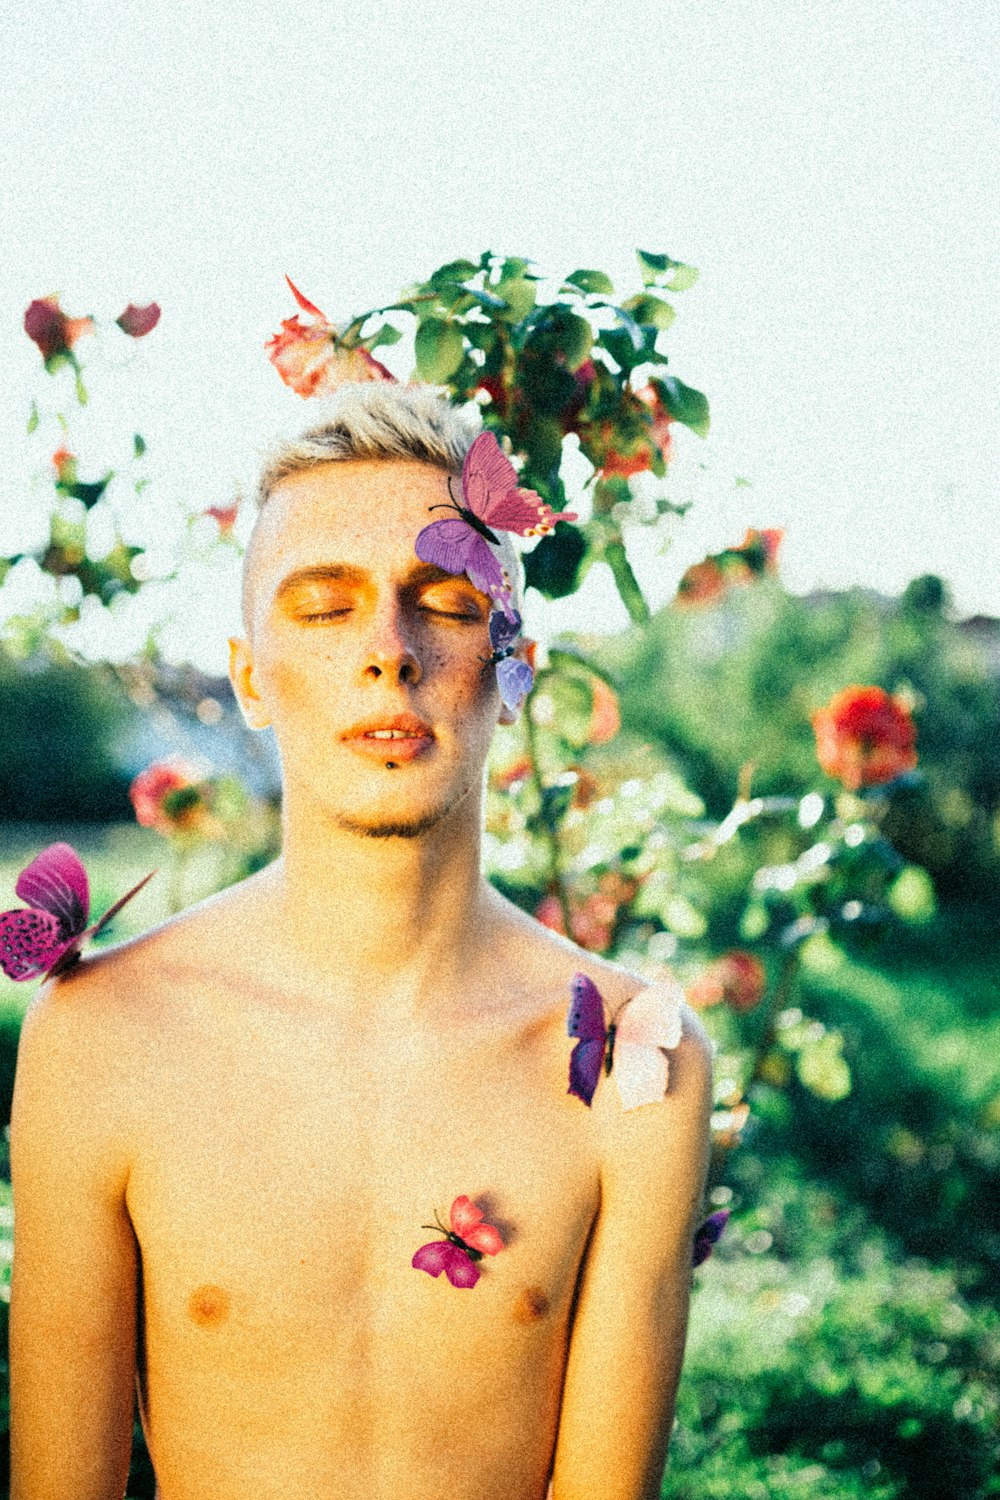 a shirtless man with flowers on his head